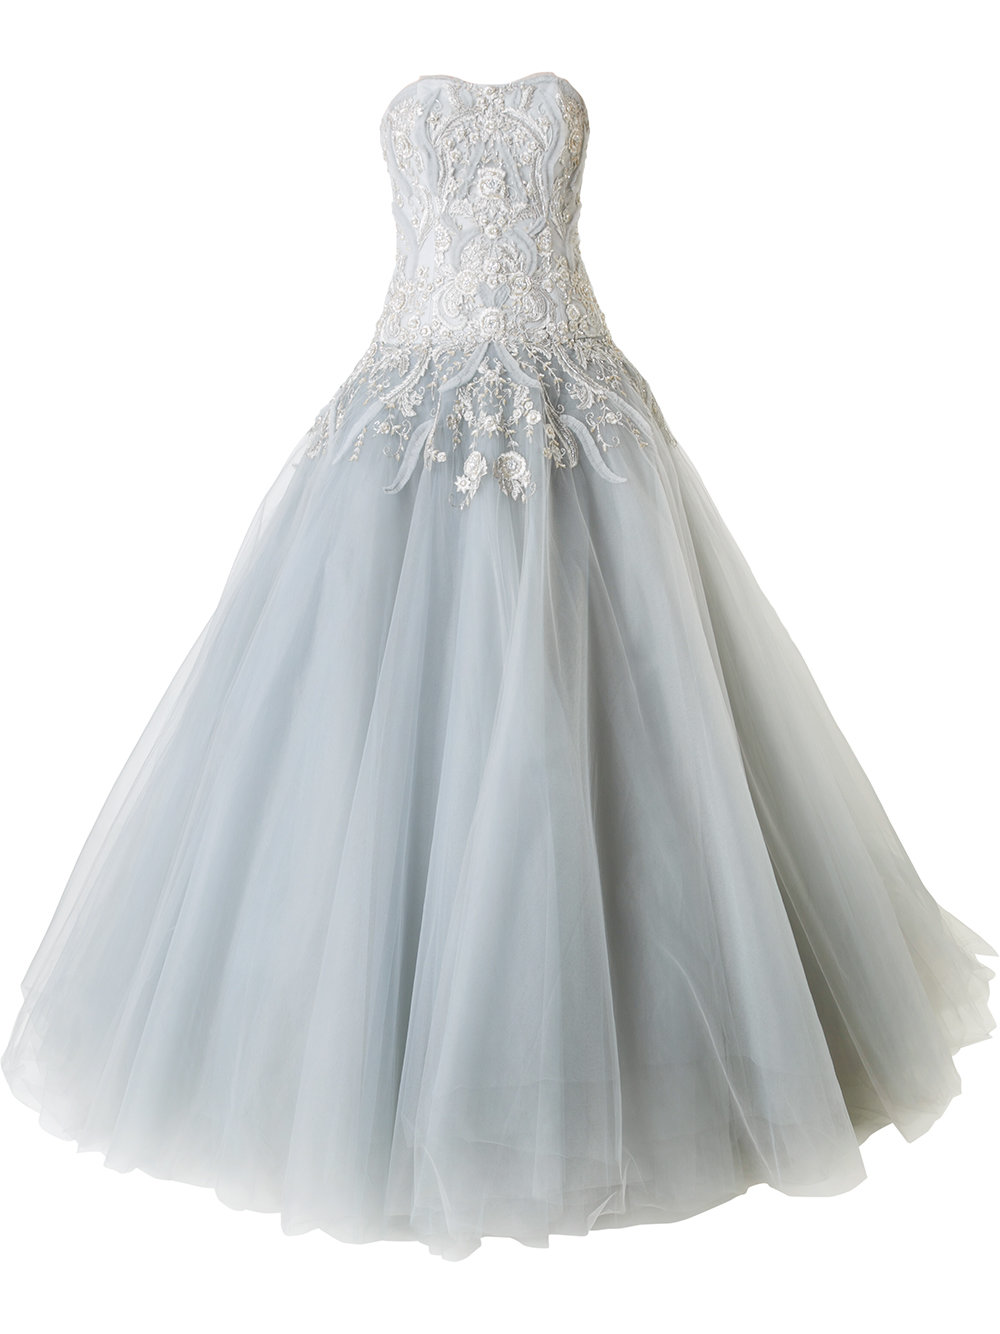 Ice Grey Strapless Bridal Wedding Dress With Lace